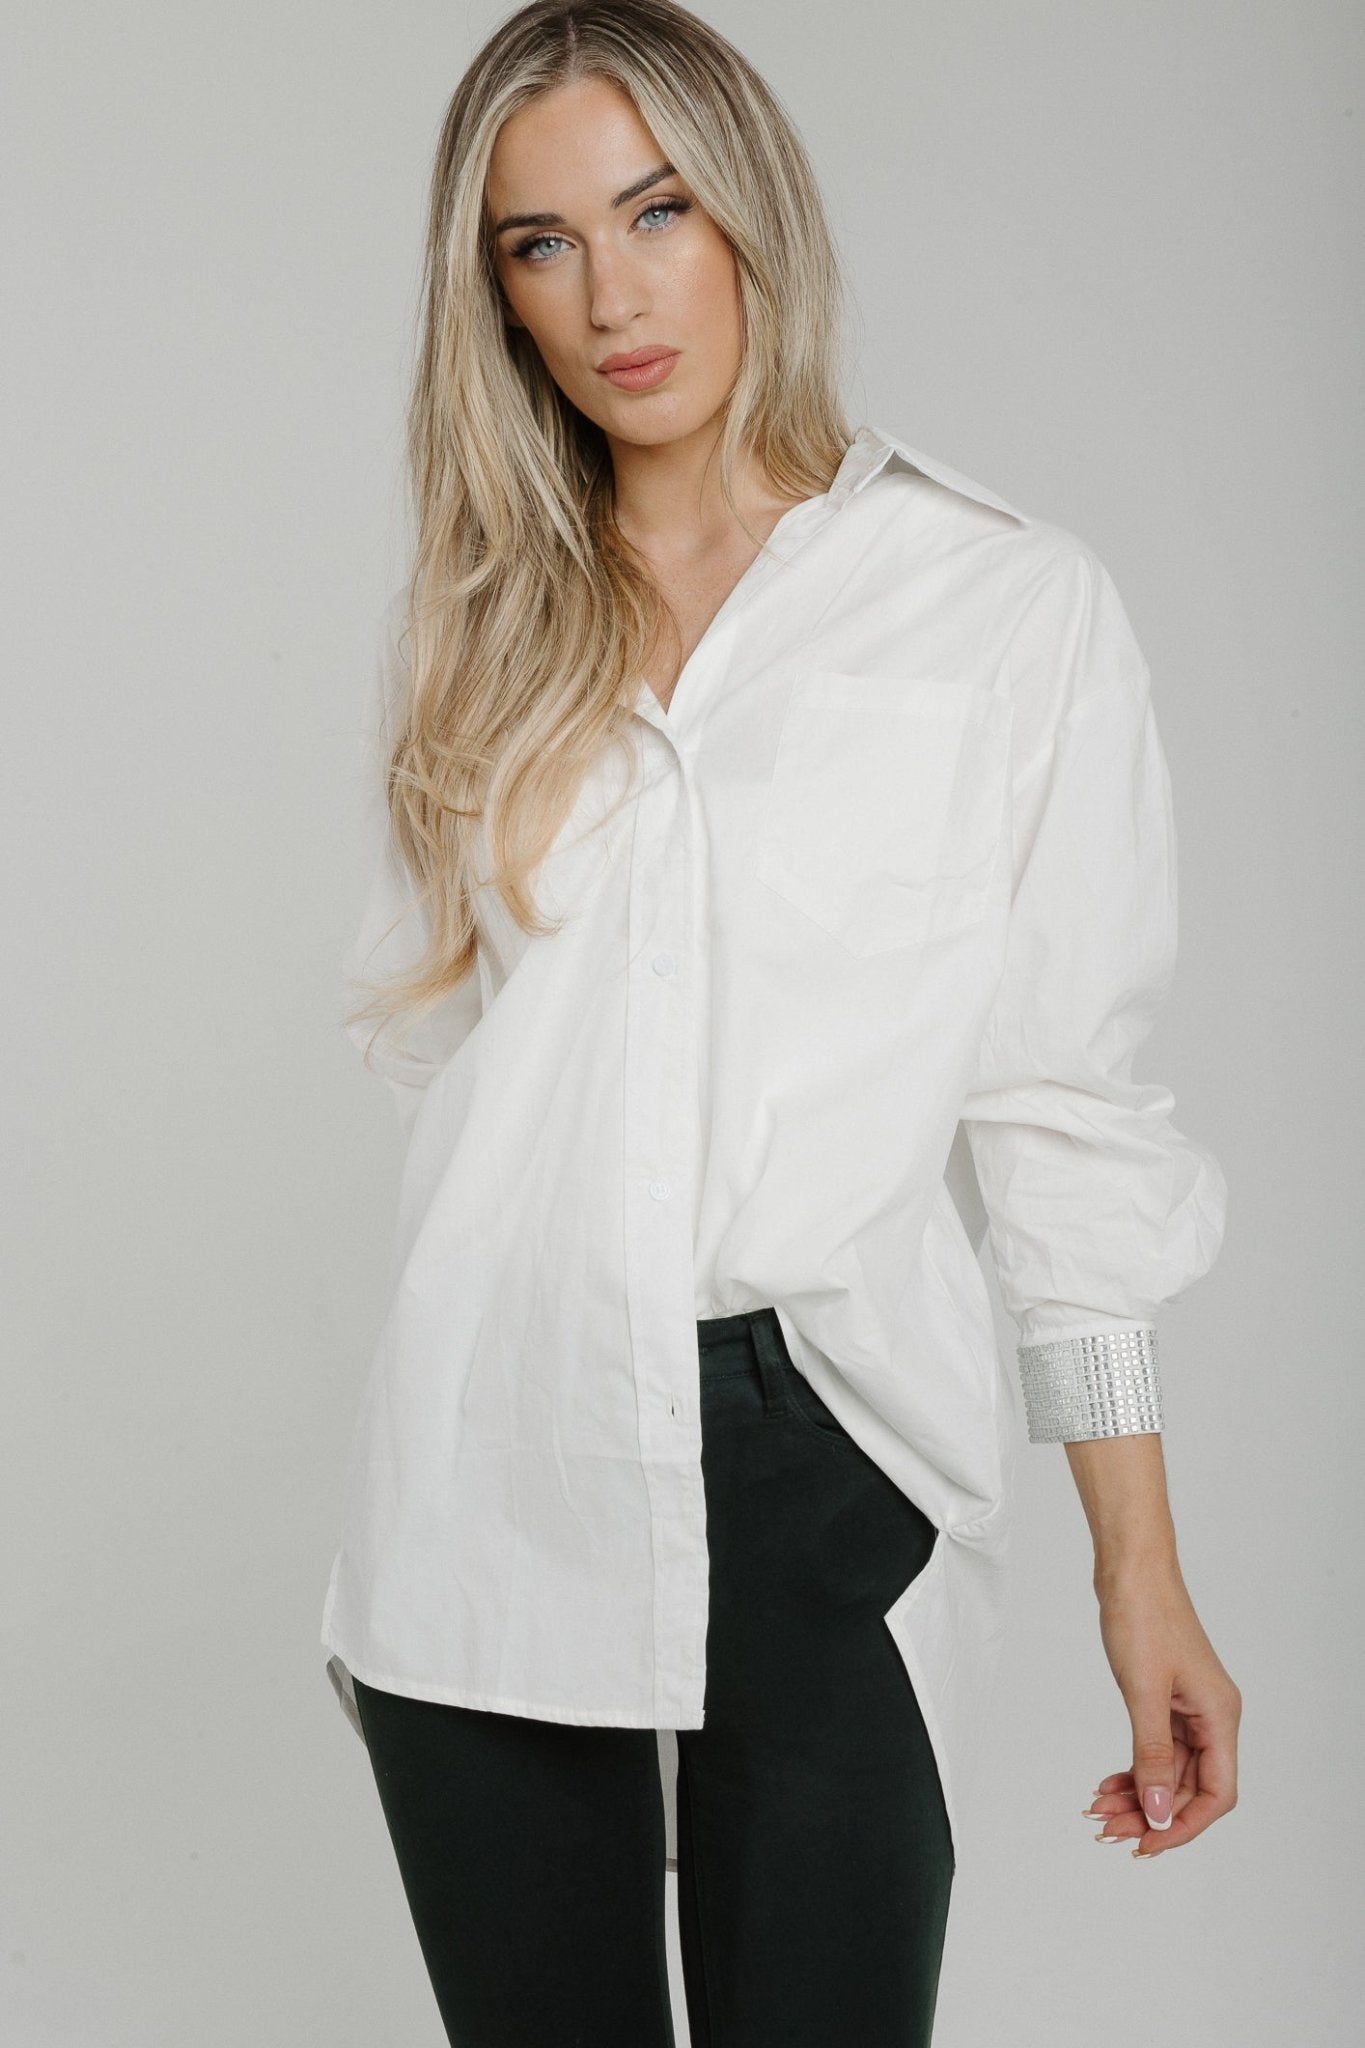 Holly Embellished Cuff Shirt In White - The Walk in Wardrobe